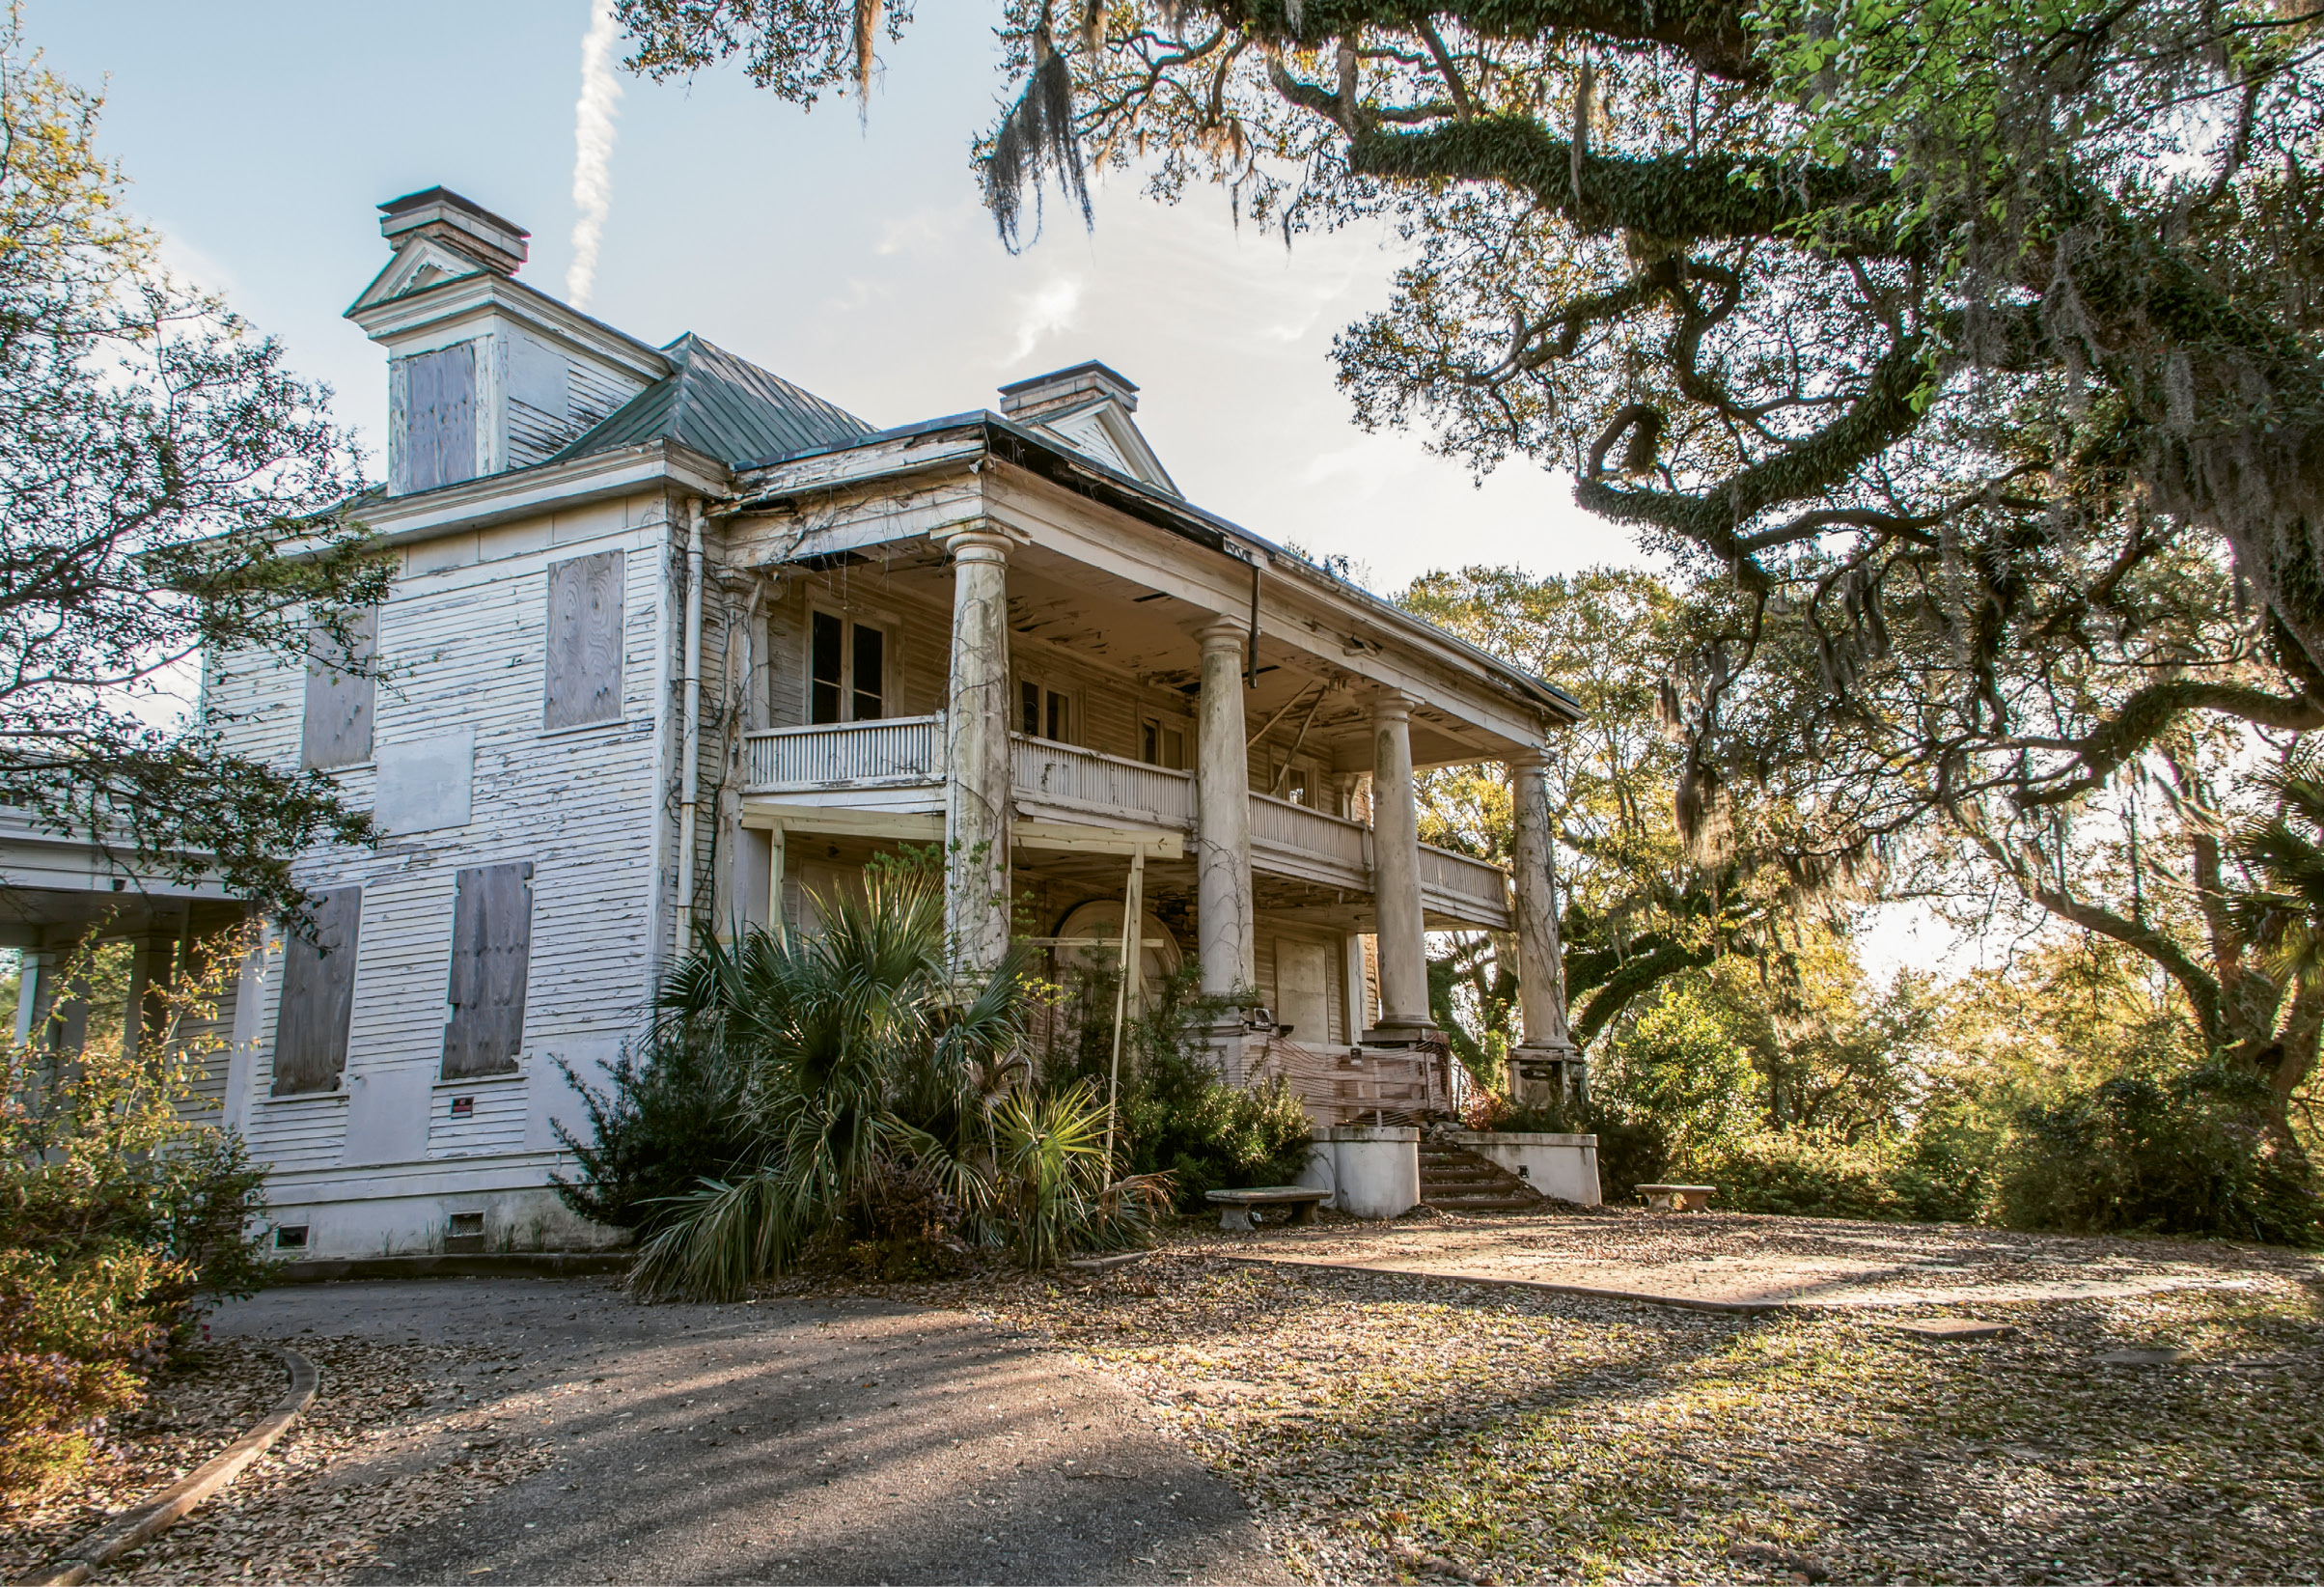 Silent Decay by Brandon Coffey  {Amateur category}  - The circa-1905 Admiral’s House on the Old Naval Base in March 2016